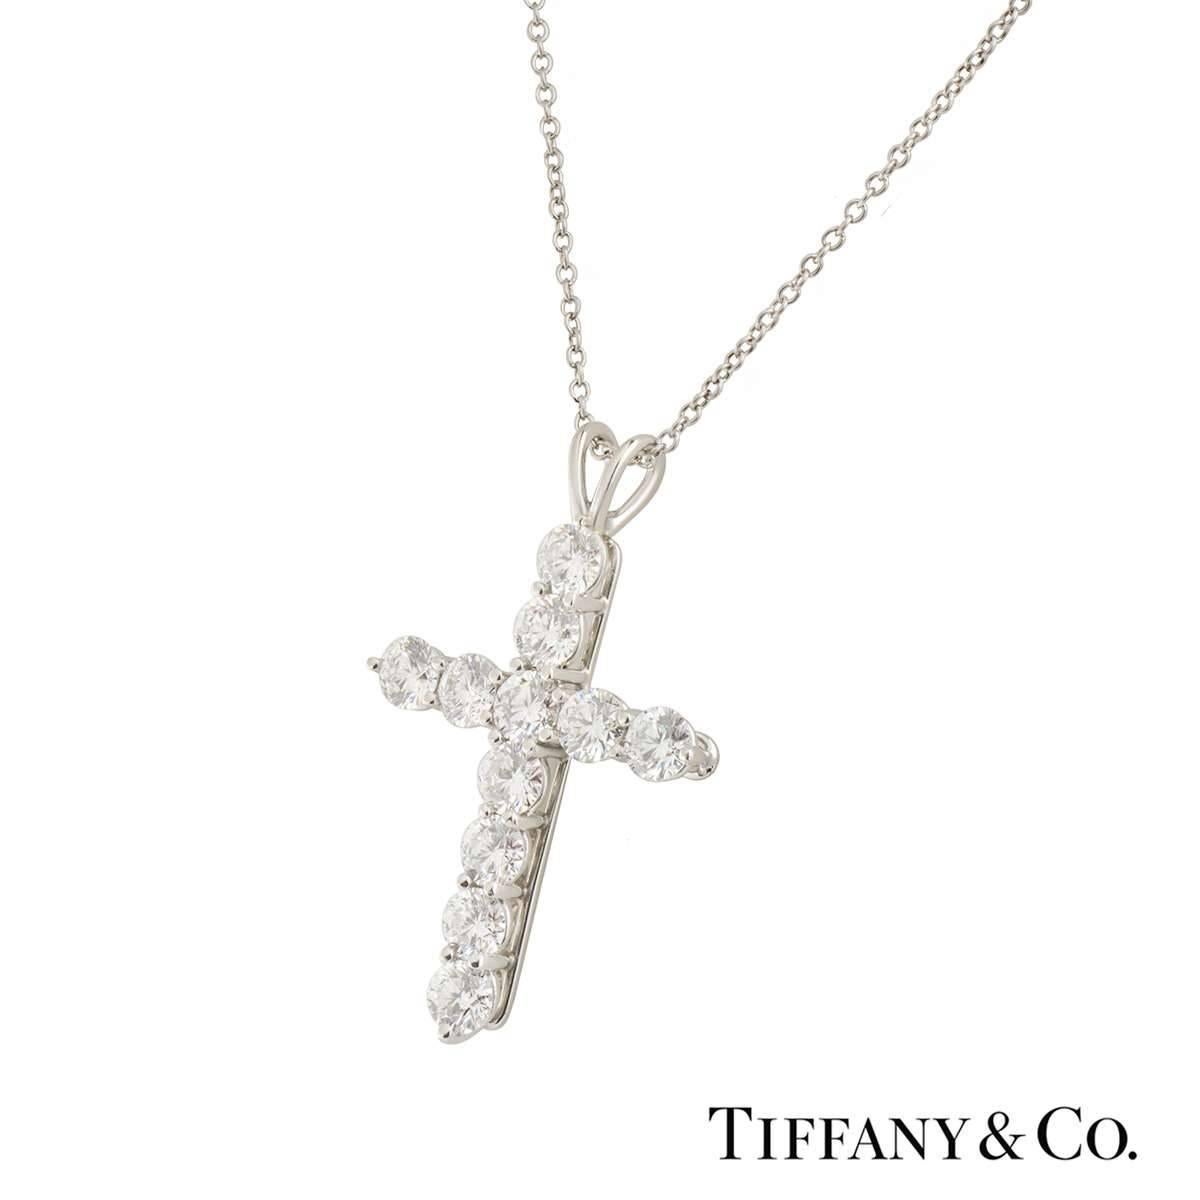 A Tiffany & Co. diamond cross pendant in platinum. The pendant is made up of 11 round brilliant cut diamonds totalling approximately 1.65ct, the diamonds are G colour and VS2 clarity. The pendant measures, 2.7cm in length and 2cm in width, on the